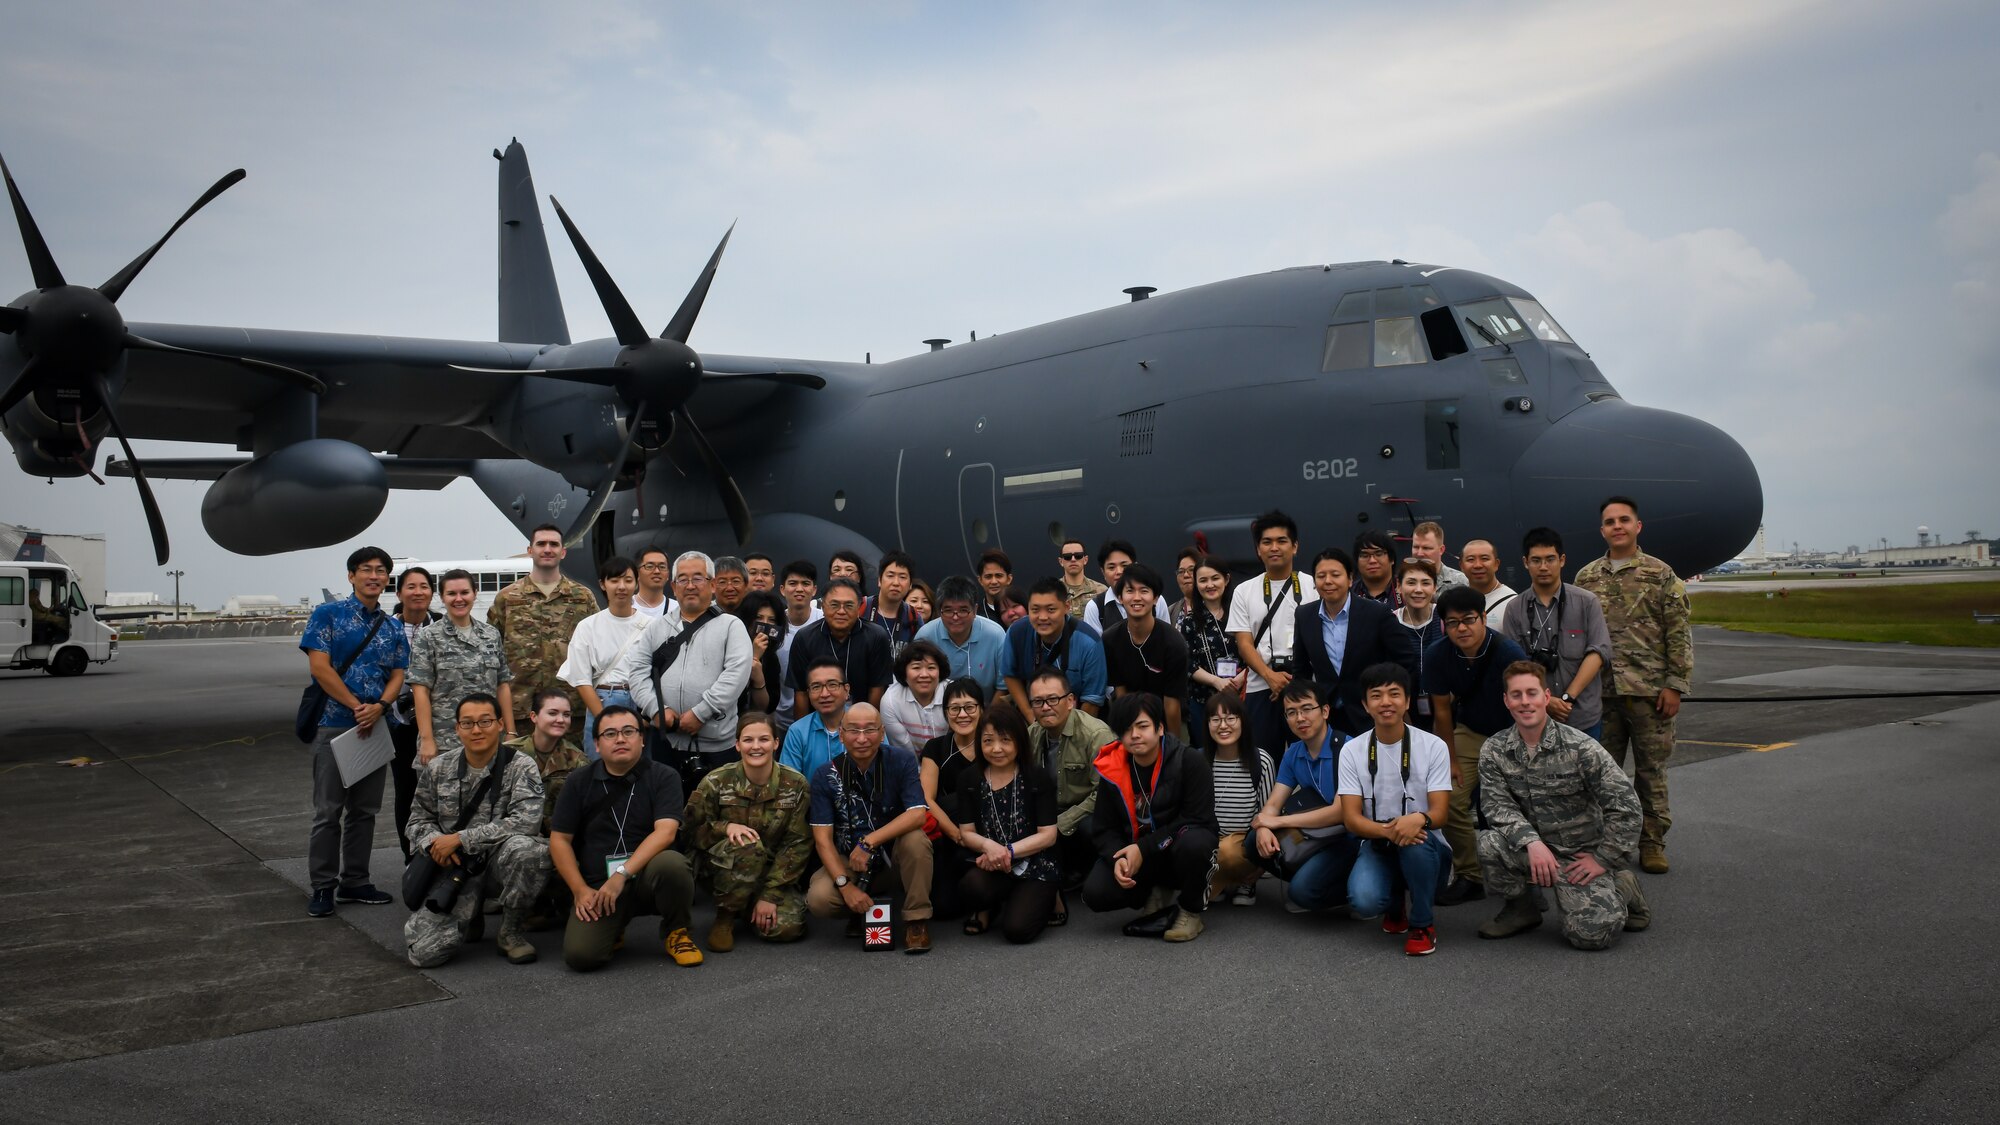 Members from 18th Wing Public Affairs and Twitter Tour visitors pose for a photo in front of an MC-130J Commando II on Kadena Air Base, Japan, Nov. 4, 2019. During the tour, visitors learned about the 18th Wing mission, security forces partnerships with the Okinawa Prefectural Police, how the base maintains good stewardship of the environment, and Kadena-based aircraft. (U.S. Air Force photo by Staff Sgt. Benjamin Raughton)